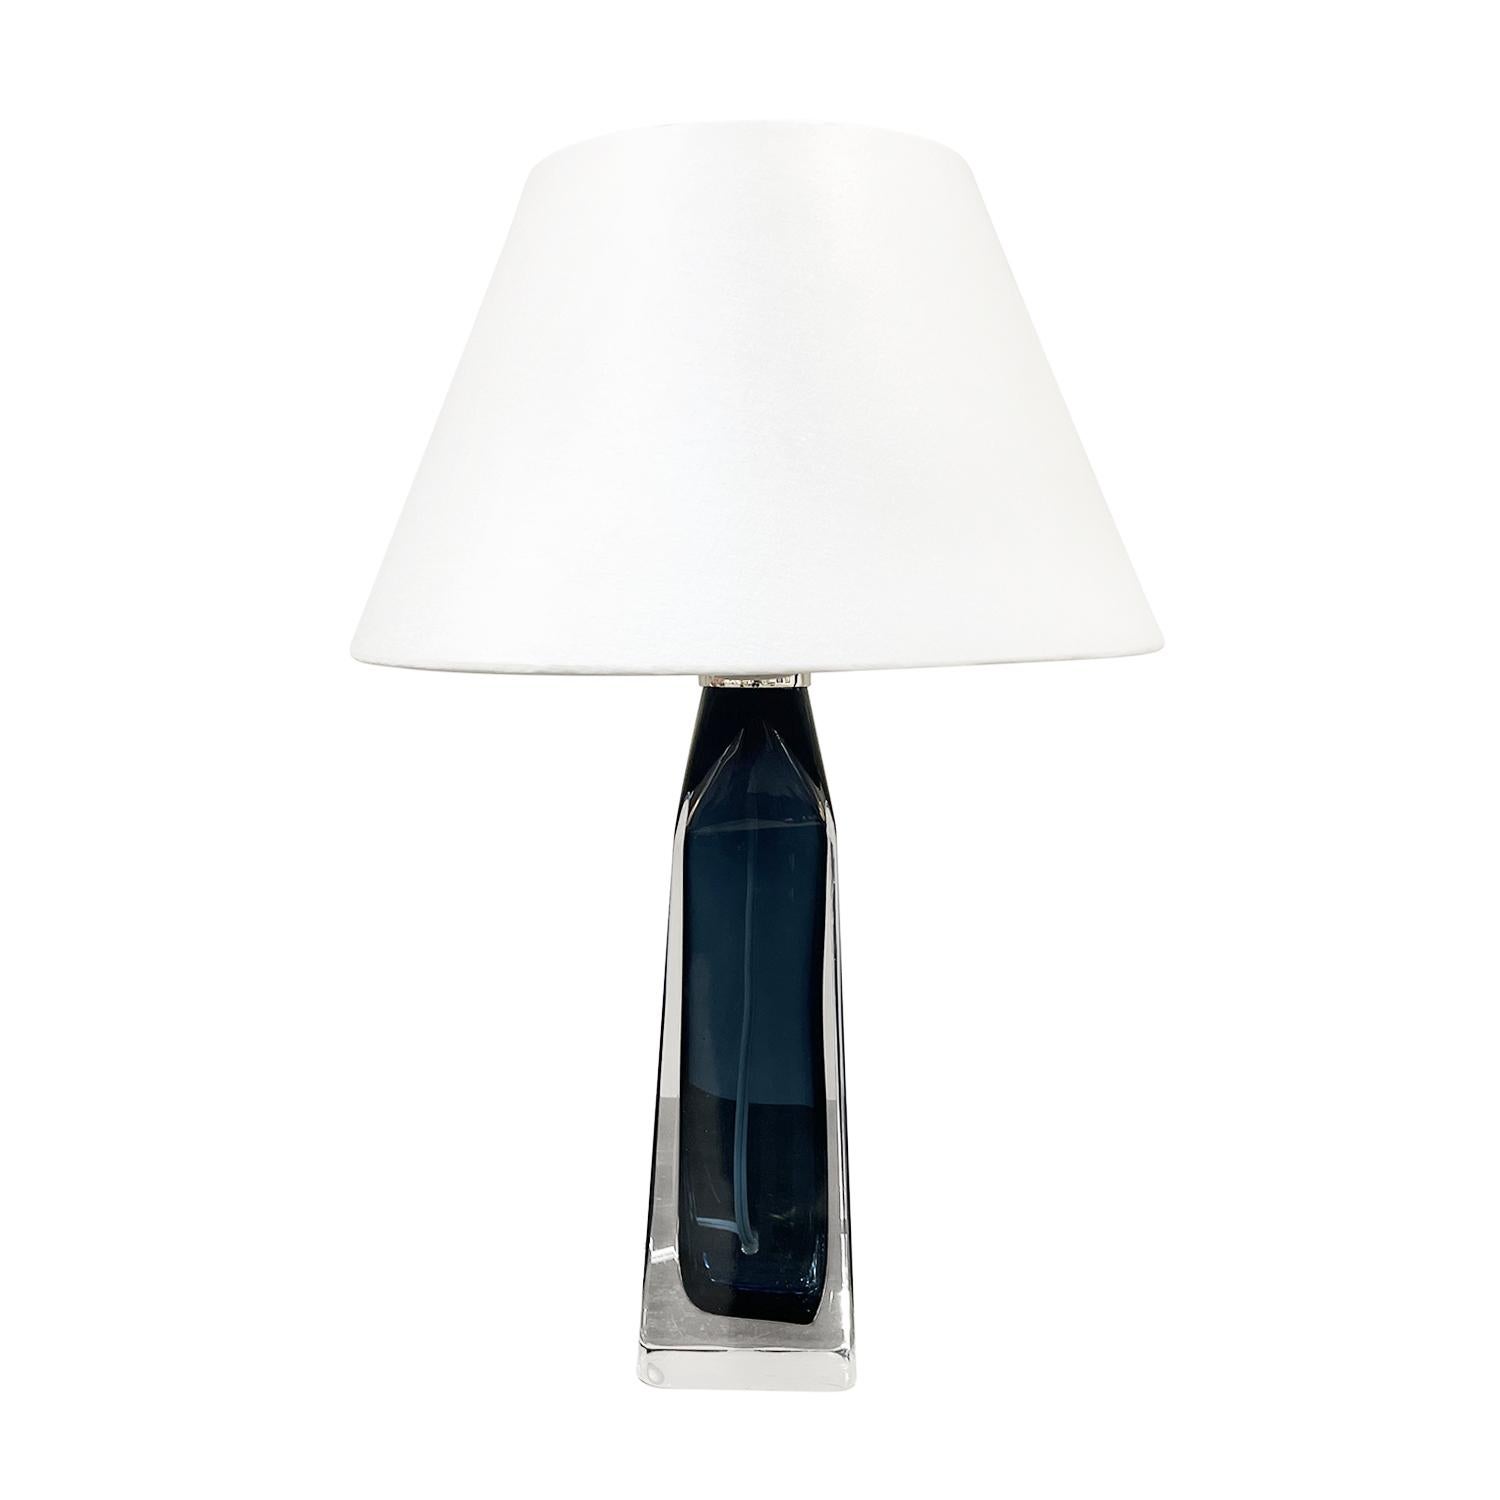 A light-blue vintage Mid-Century Modern Swedish table lamp with a new white round shade made of hand blown clear Orrefors glass, designed by Carl Fagerlund and produced, signed by Orrefors in good condition. The Scandinavian desk light is enhanced